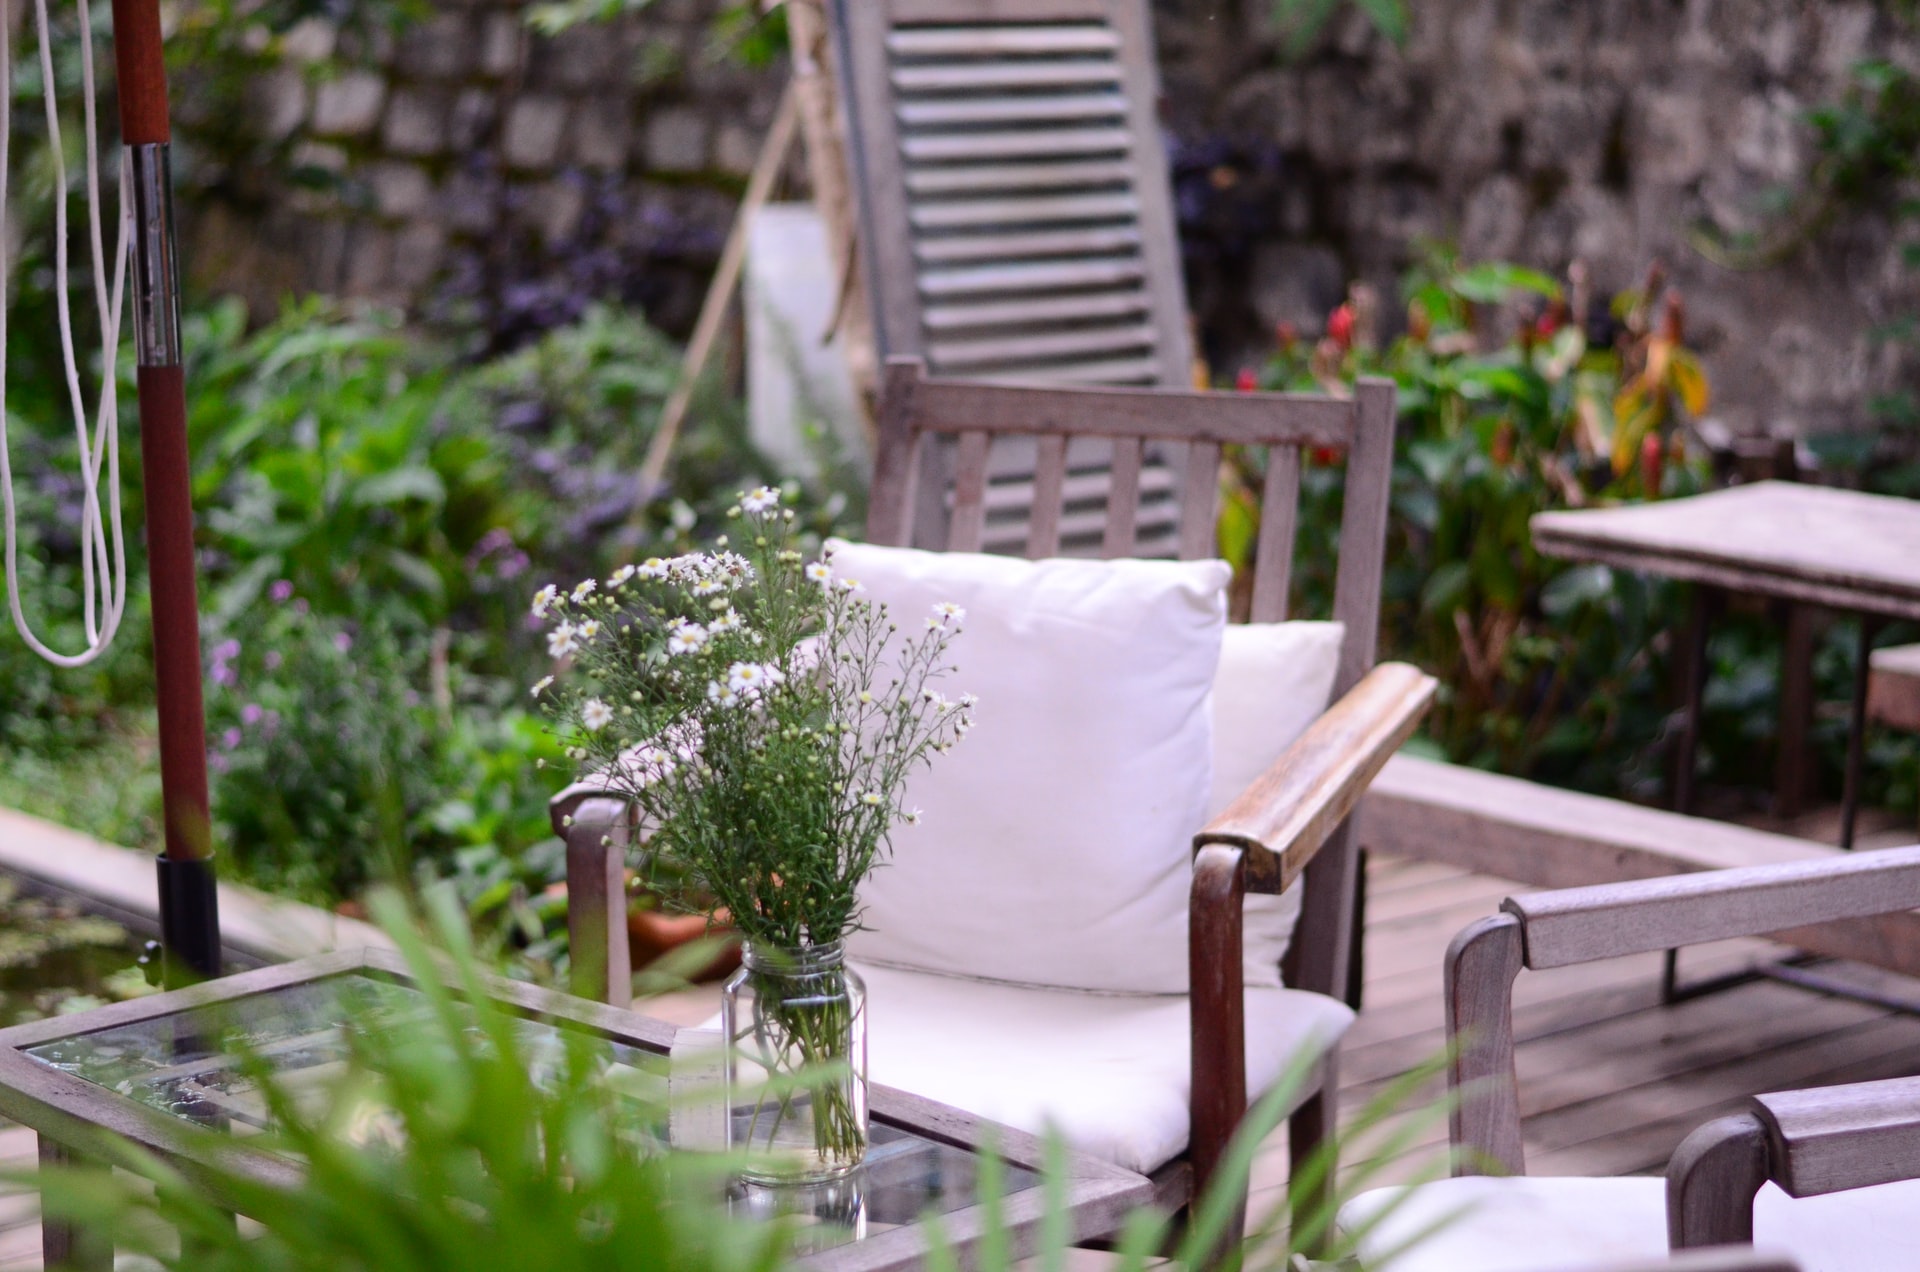 A table and chair in a patio having lots of greenery